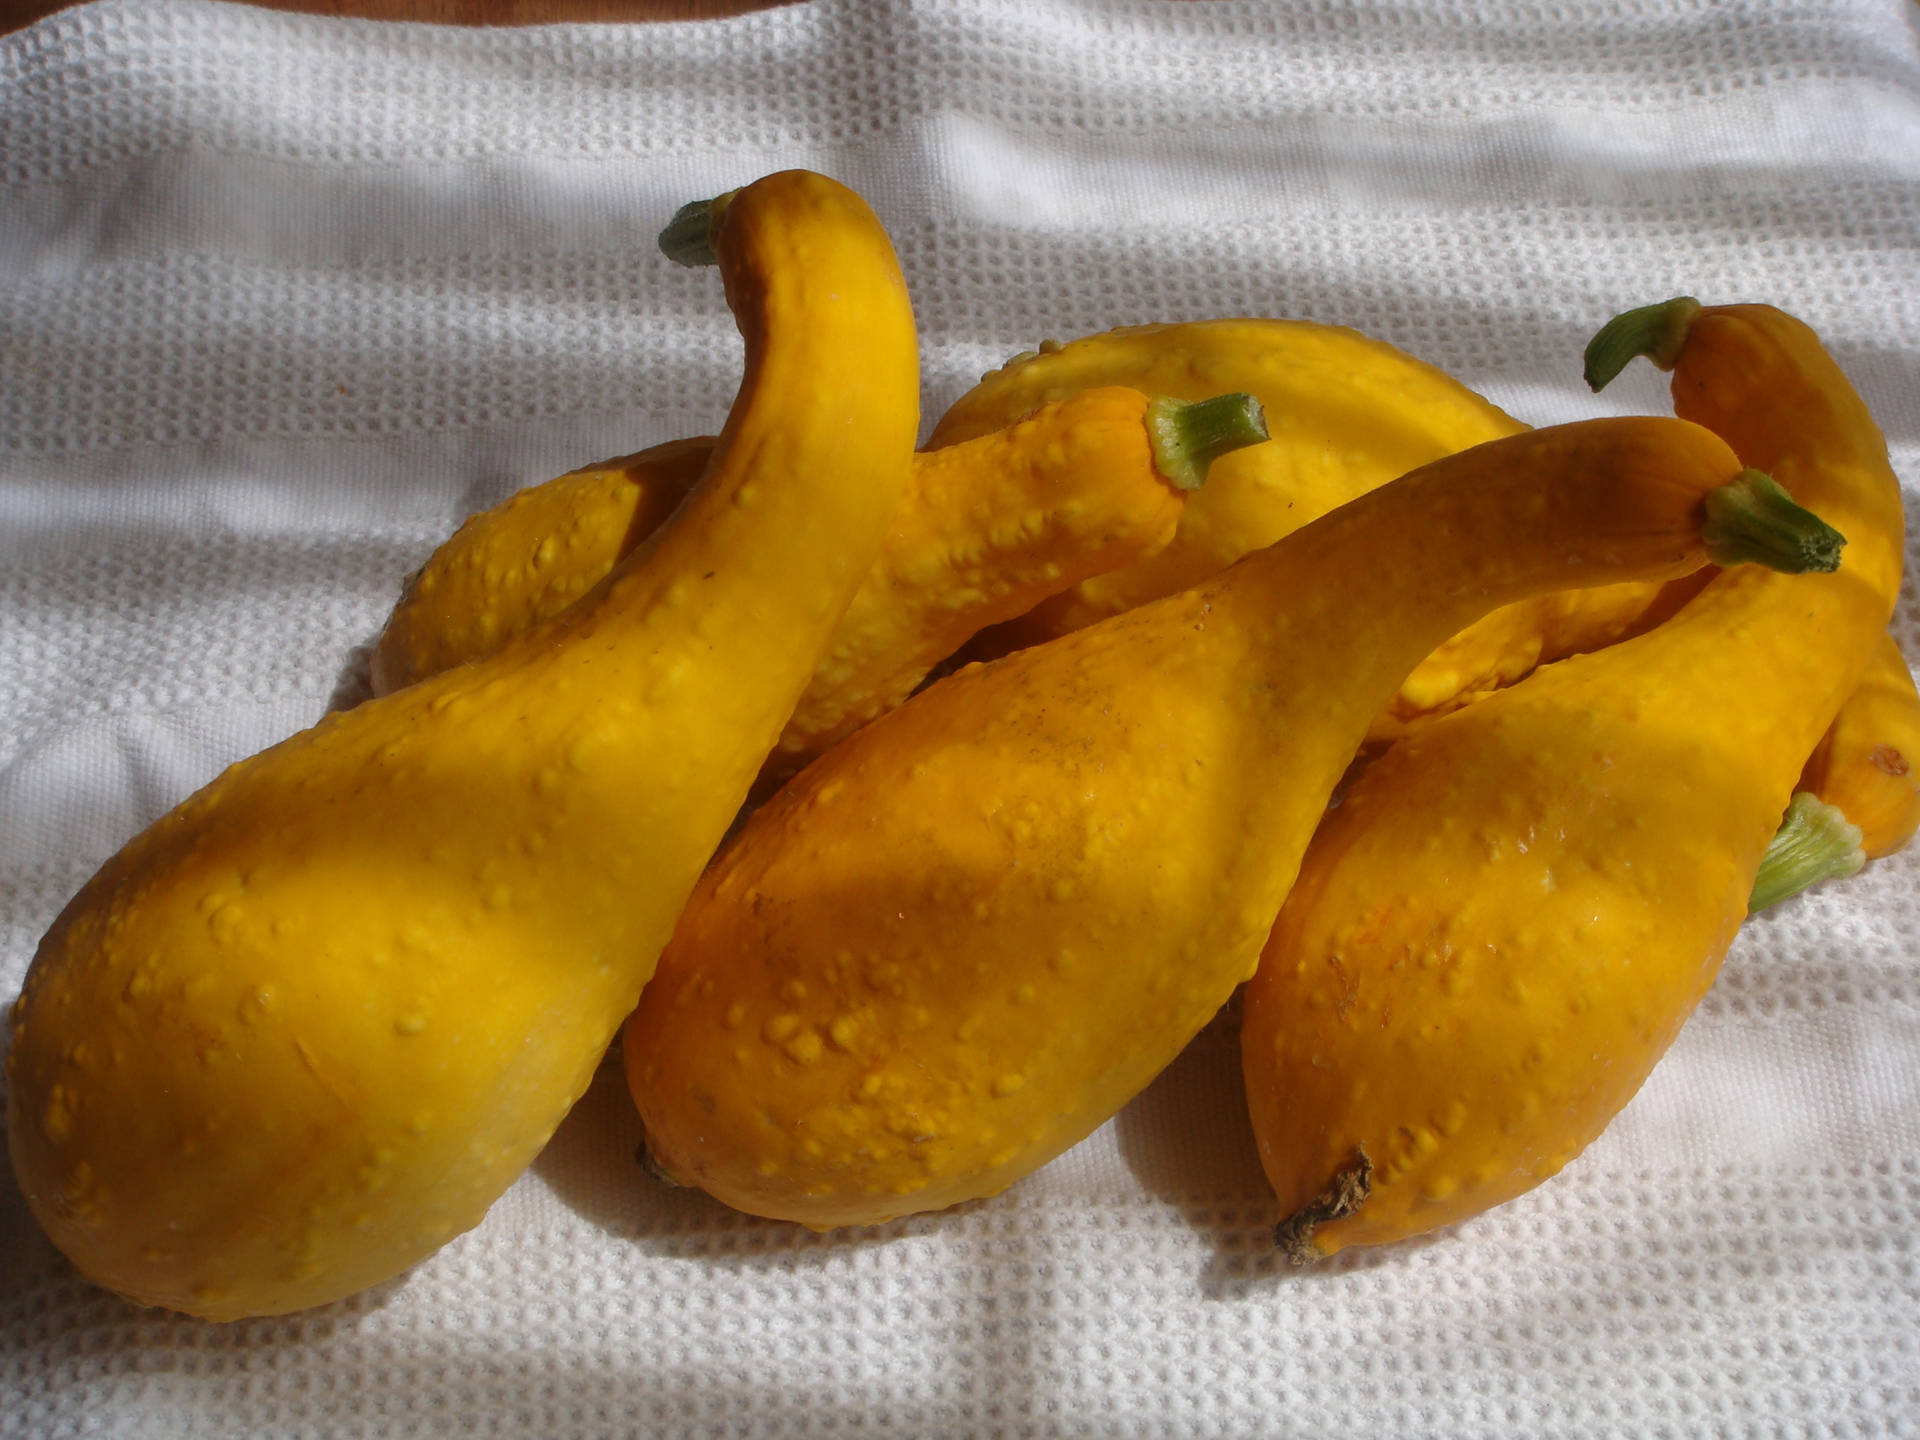 Yellow Squash Fruits With Wrinkly Skins Background